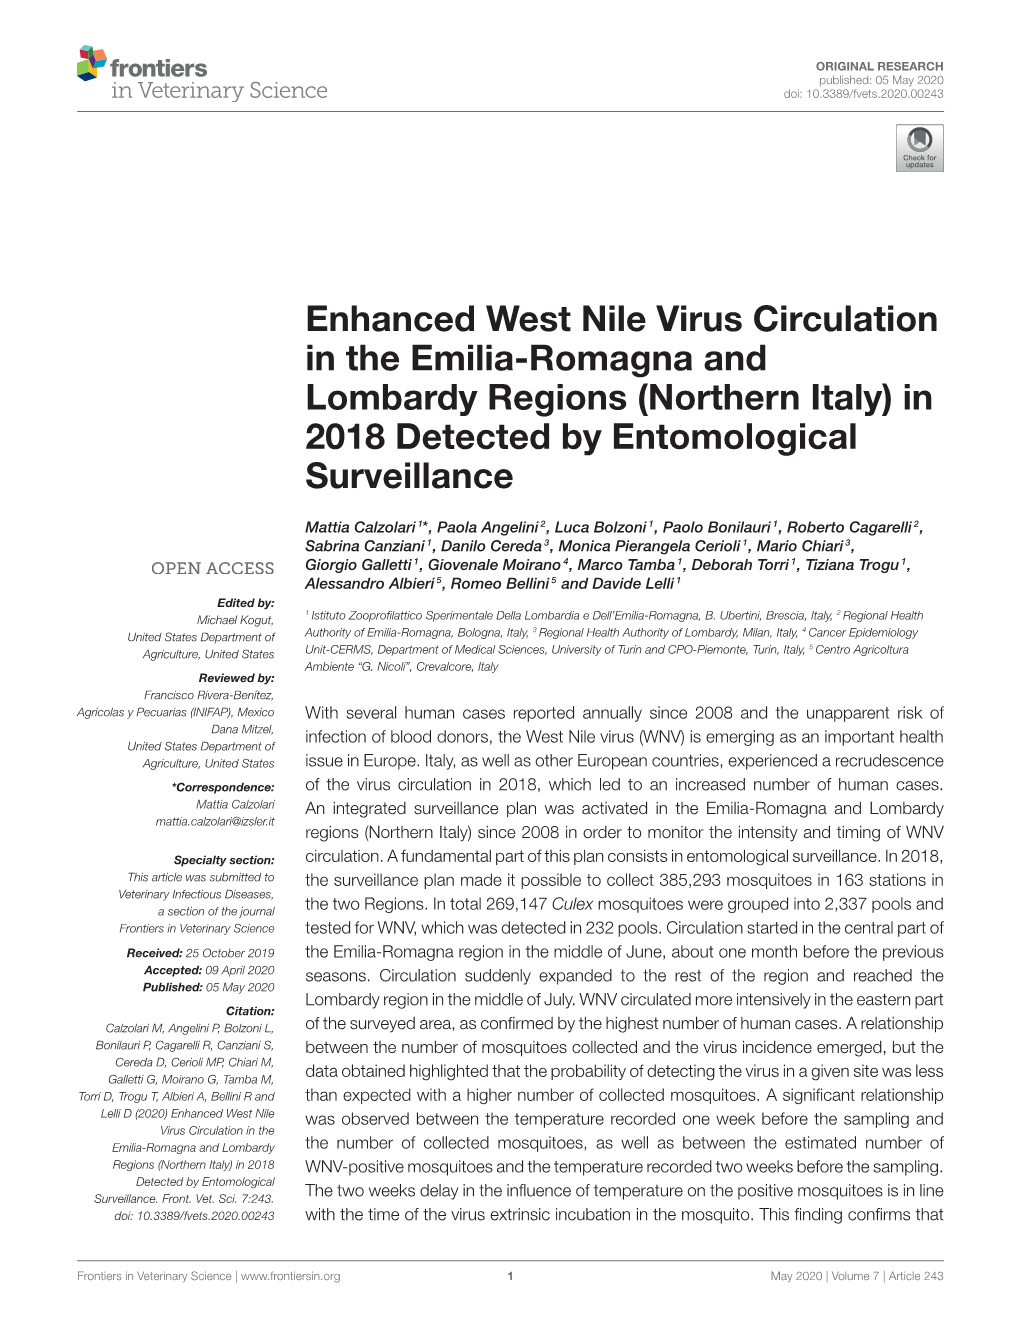 Enhanced West Nile Virus Circulation in the Emilia-Romagna and Lombardy Regions (Northern Italy) in 2018 Detected by Entomological Surveillance